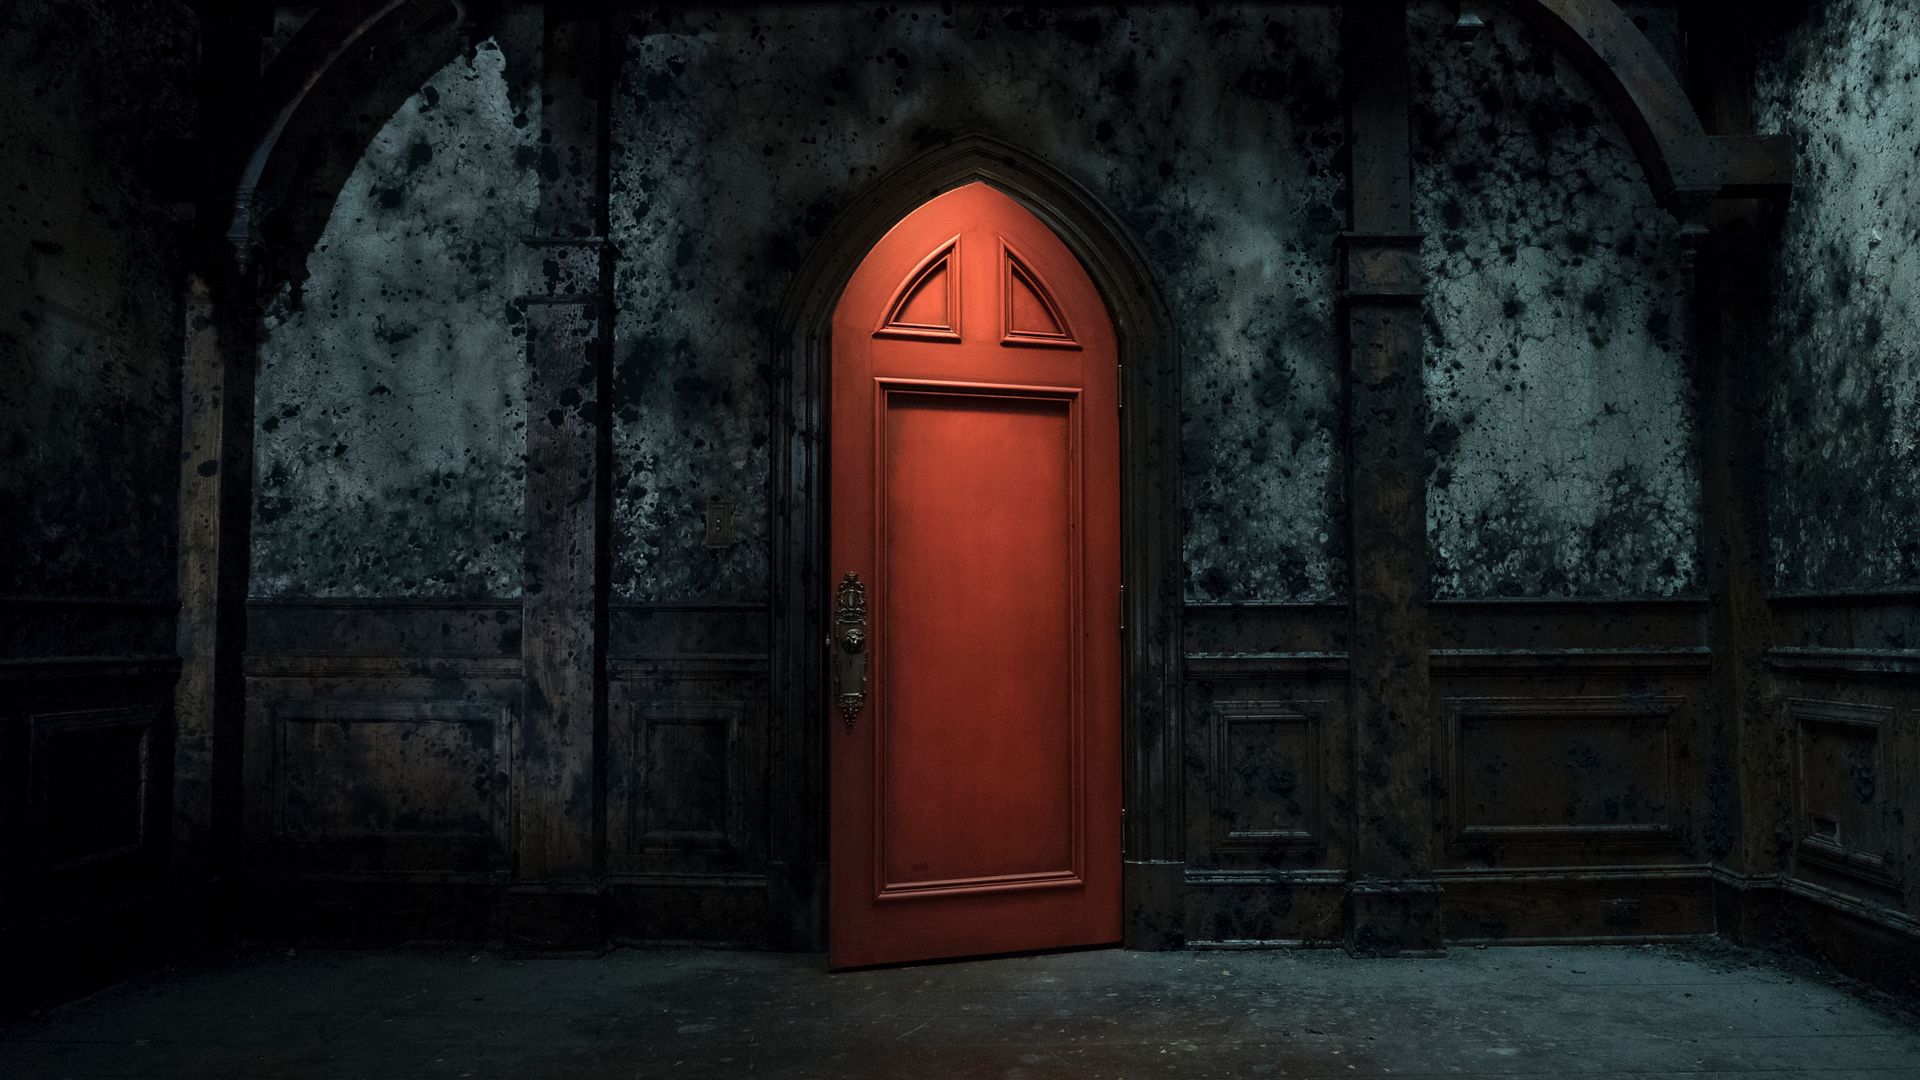 The Haunting of Hill House background